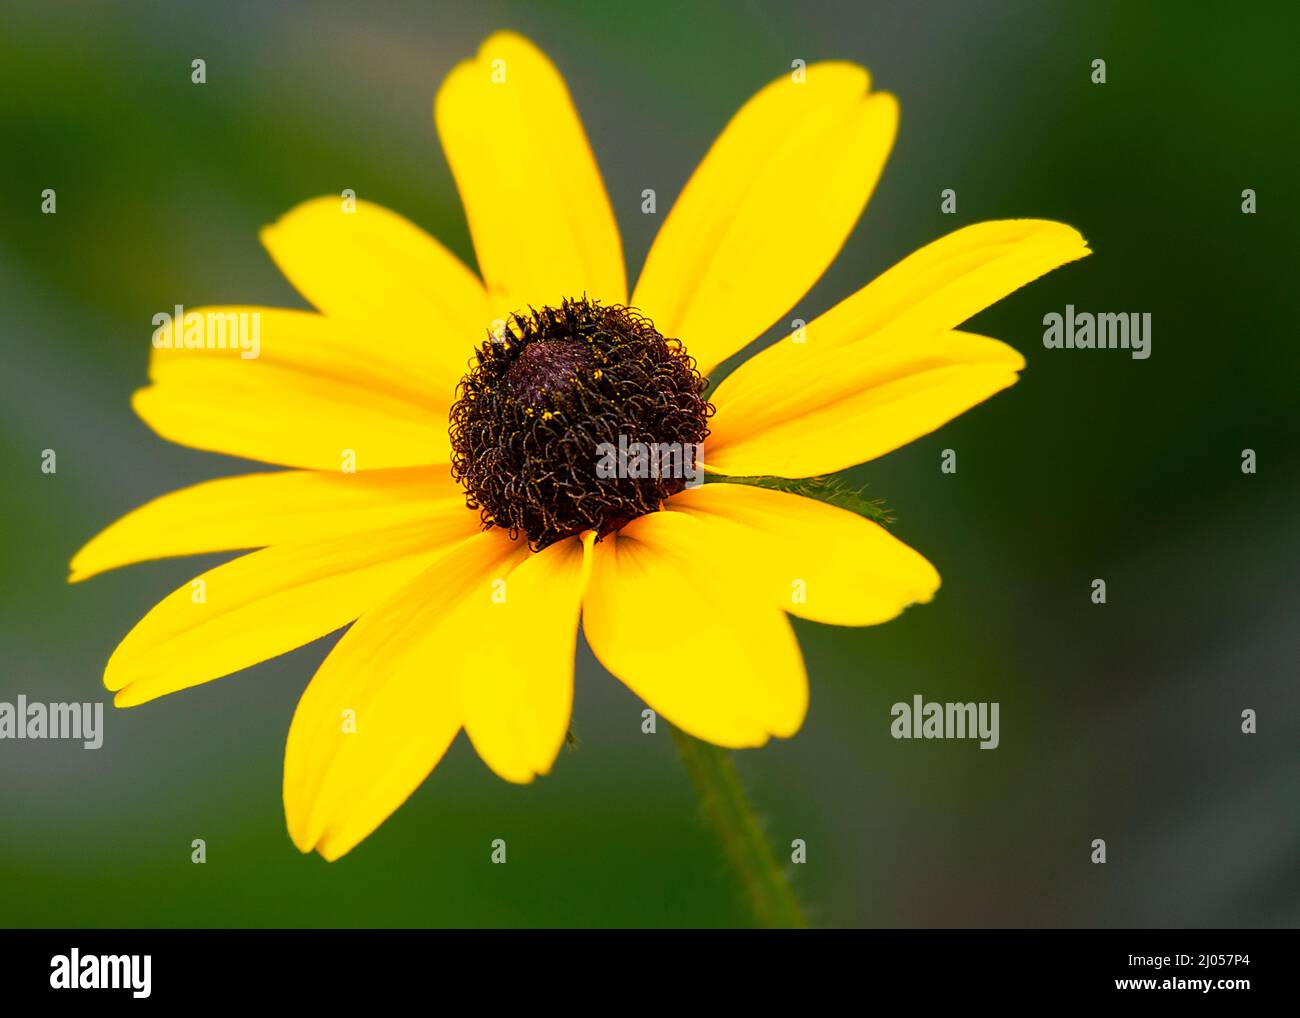 A Close up view of a black-eyed susan.  Background blurred. Stock Photo